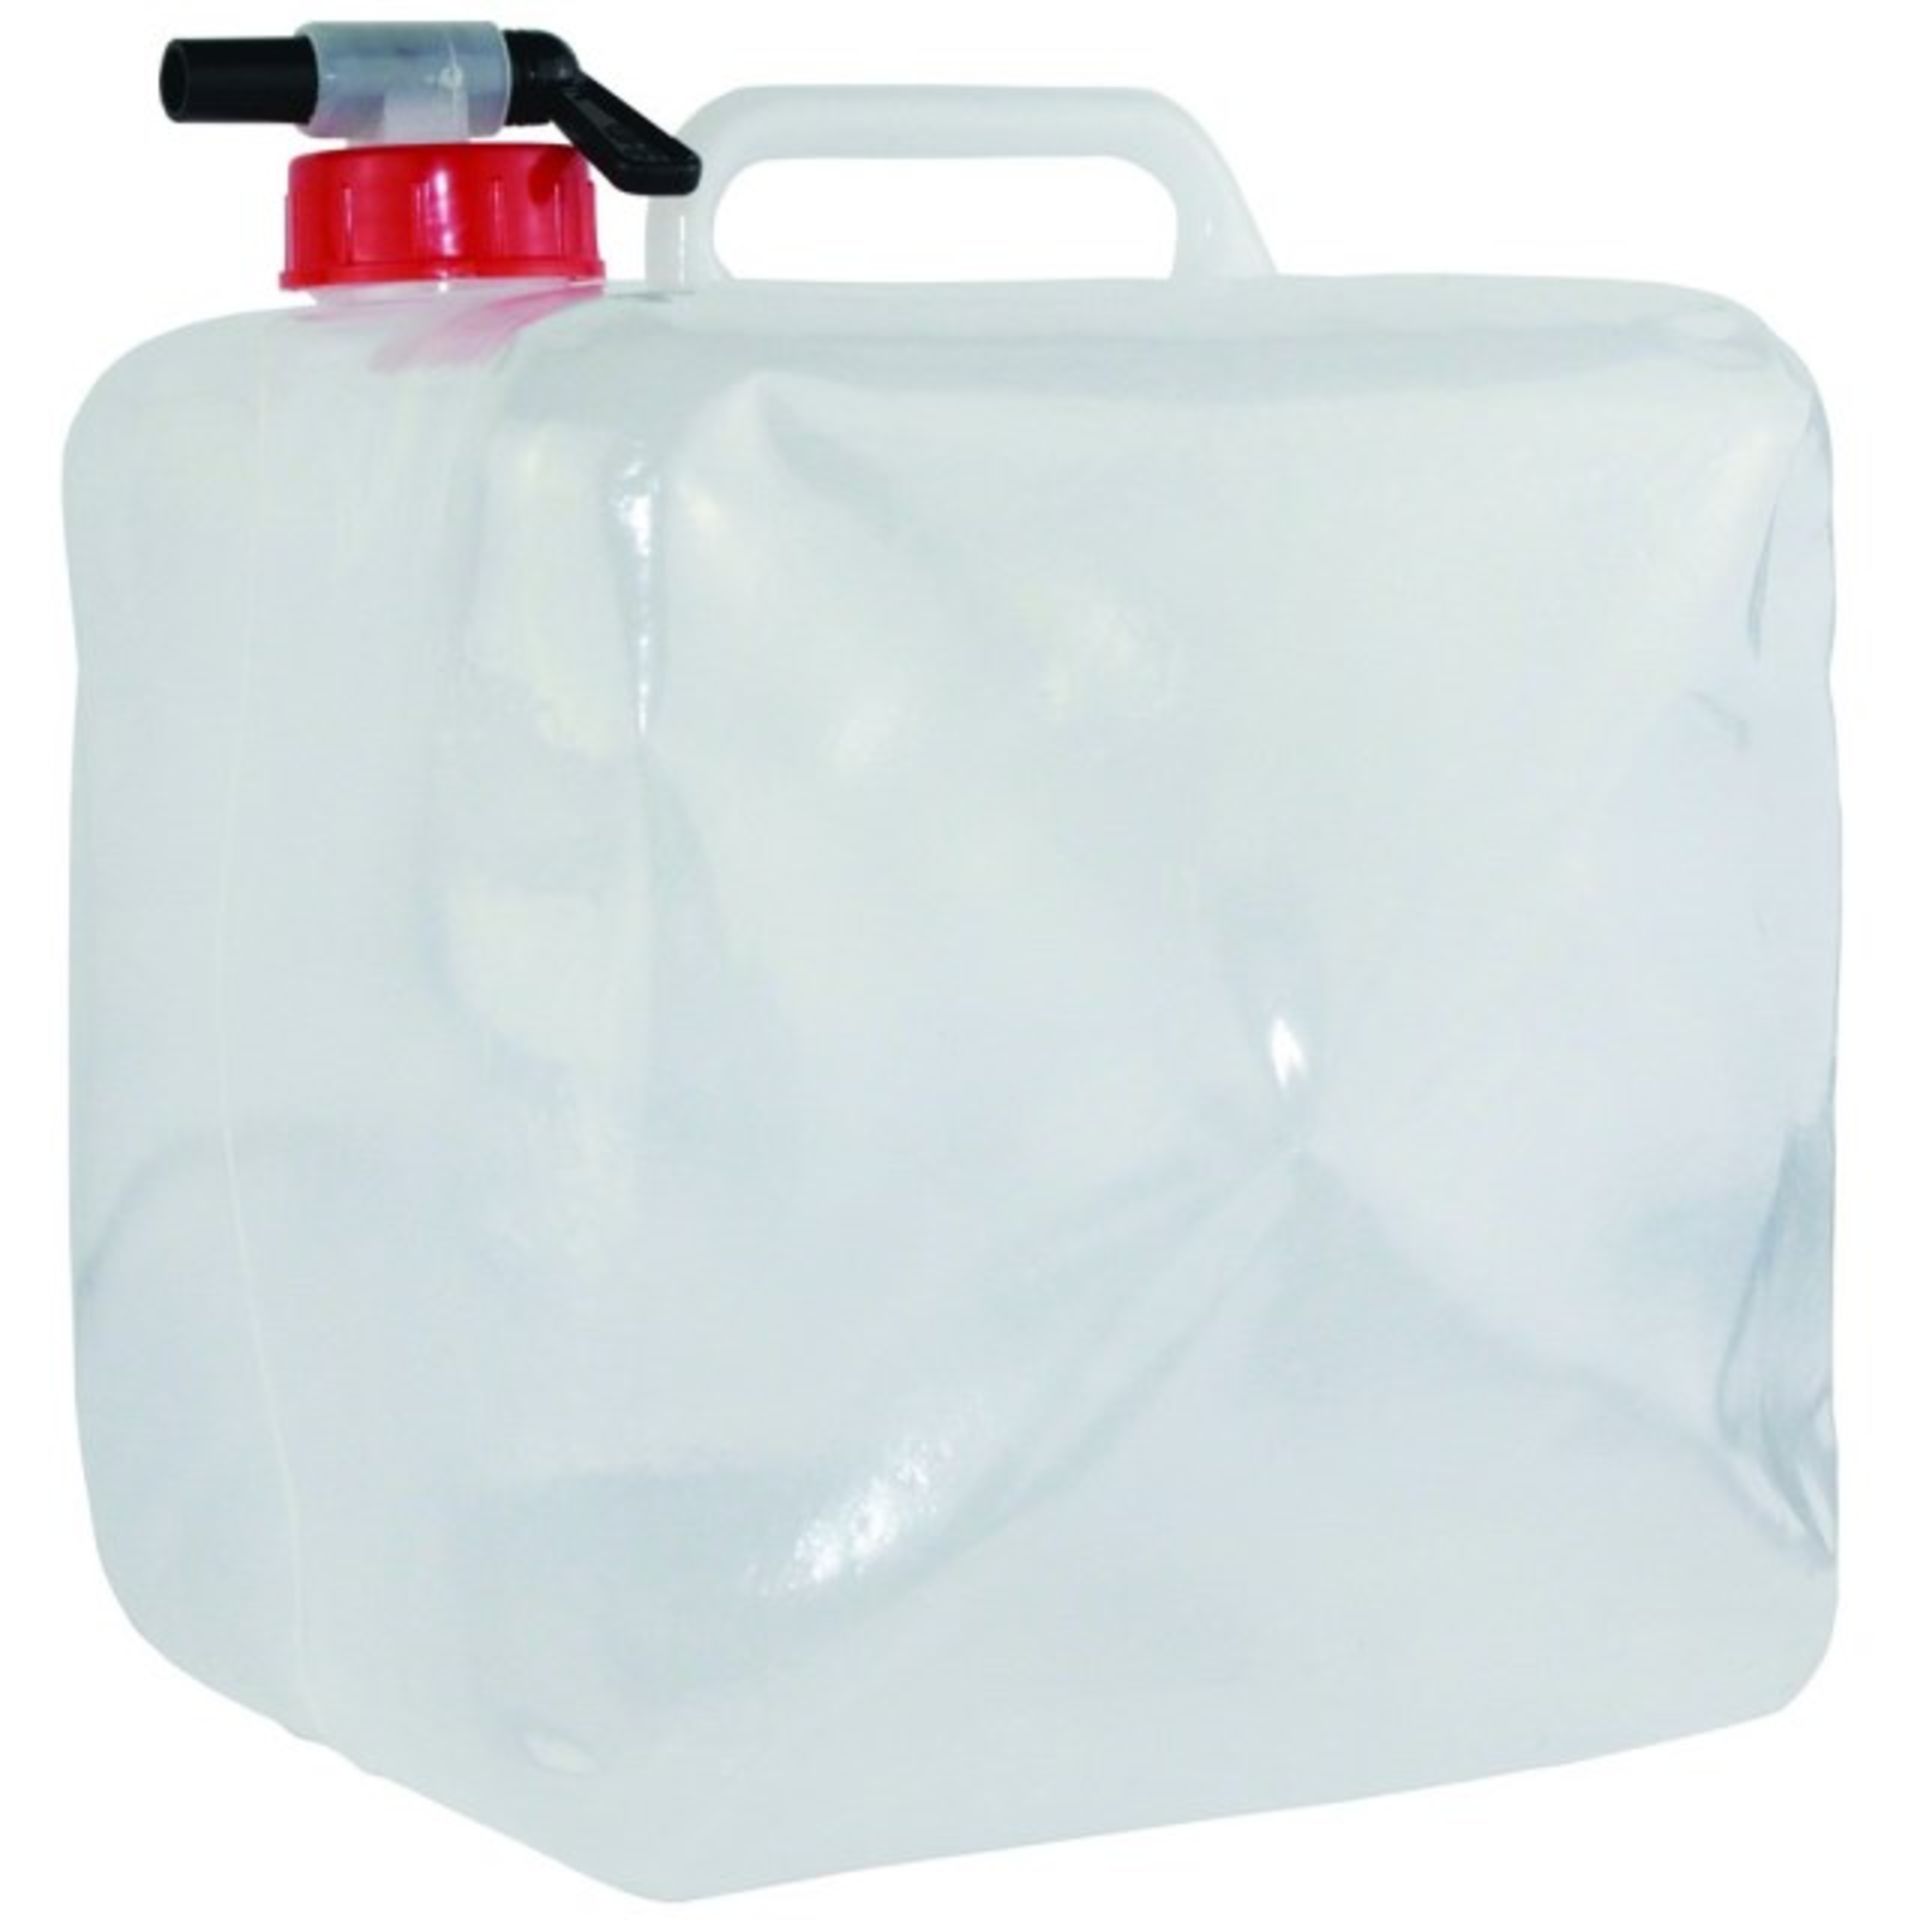 V Brand New 10L Collapsible Water Carrier With Carry Handle X 2 YOUR BID PRICE TO BE MULTIPLIED BY